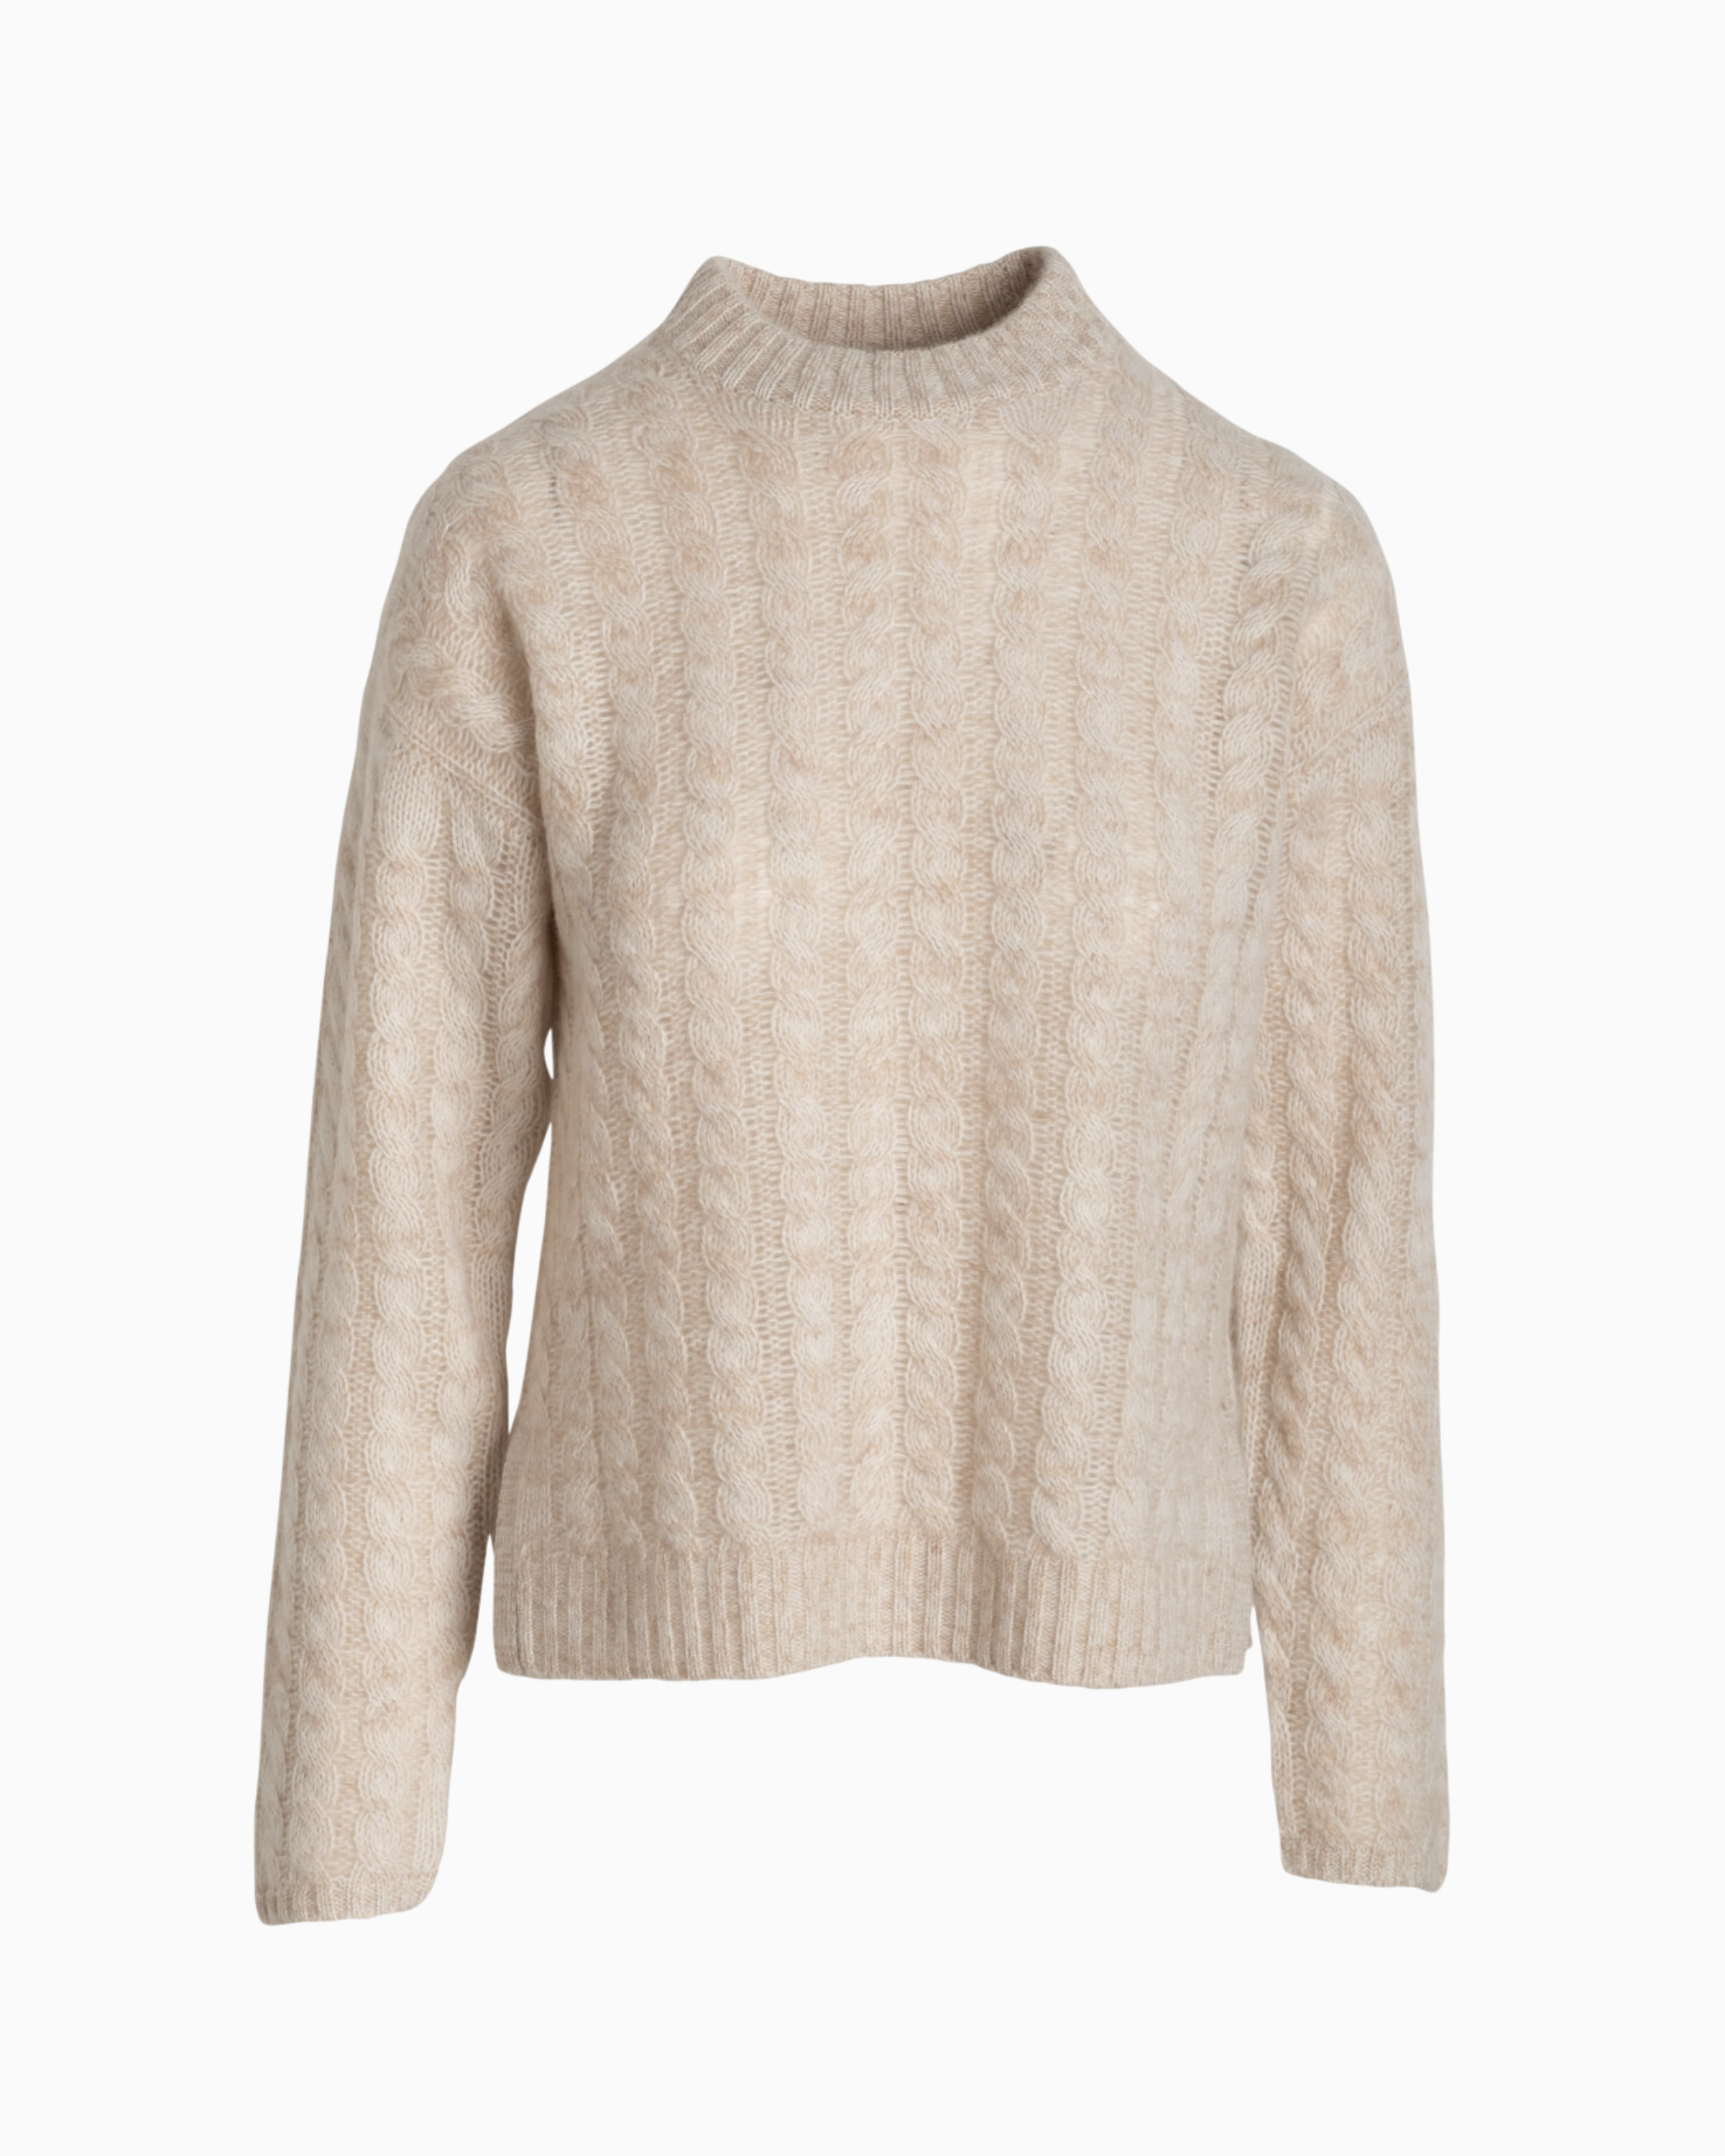 Naadam Cashmere Open Cable Crewneck Sweater in White Combo 